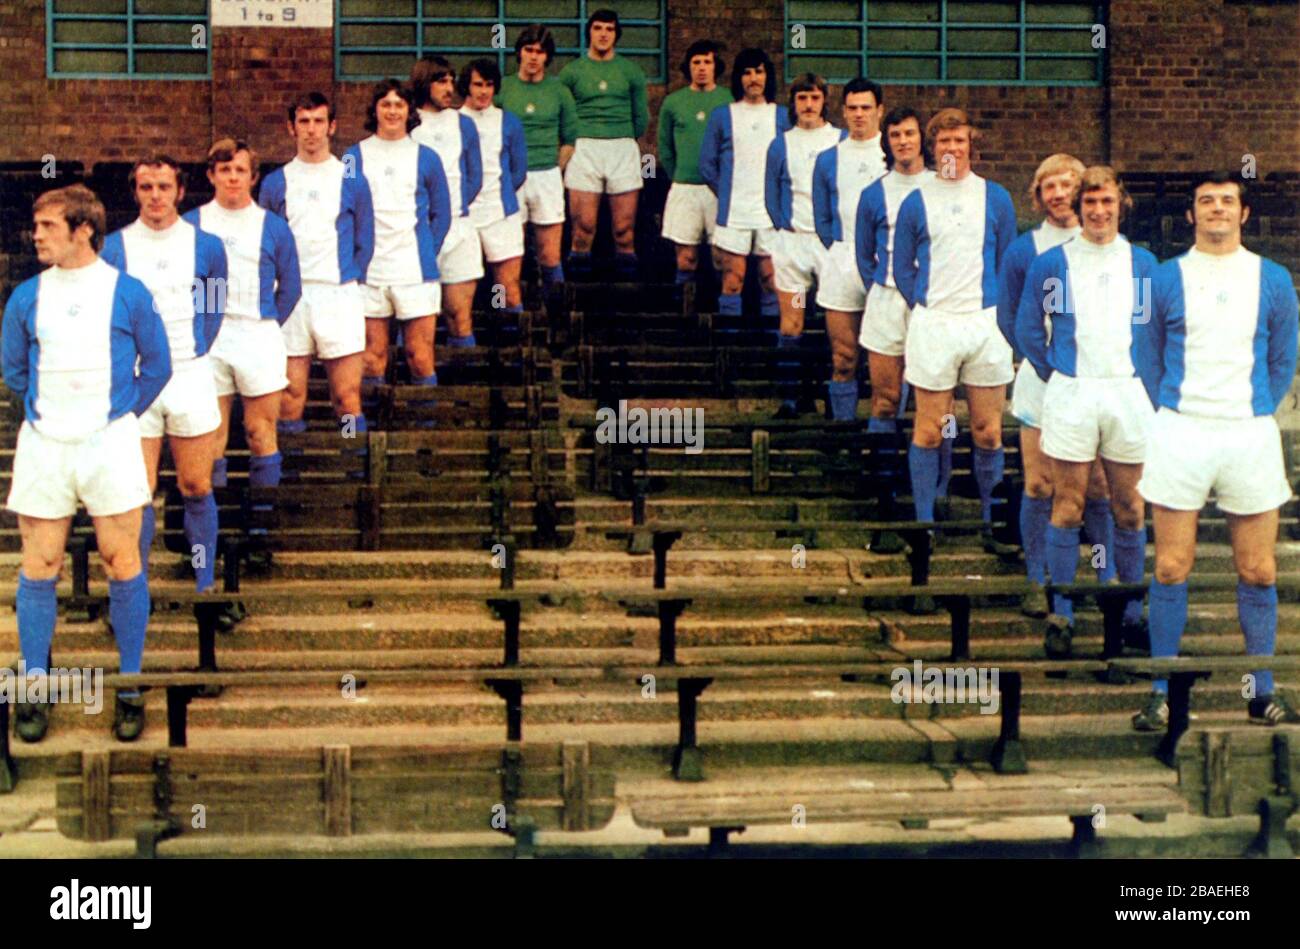 (L-R) Birmingham City team: Ray Martin, Tommy Carroll, Gordon Taylor, Bob Hatton, Trevor Francis, Bob Latchford, Malcolm Page, Mike Kelly, Dave Latchford, Paul Cooper, Alan Campbell, Gary Pendrey, Roger Hynd, Phil Summerill, Dave Robinson, George Smith, Keith Bowker et Stan Harland. Banque D'Images